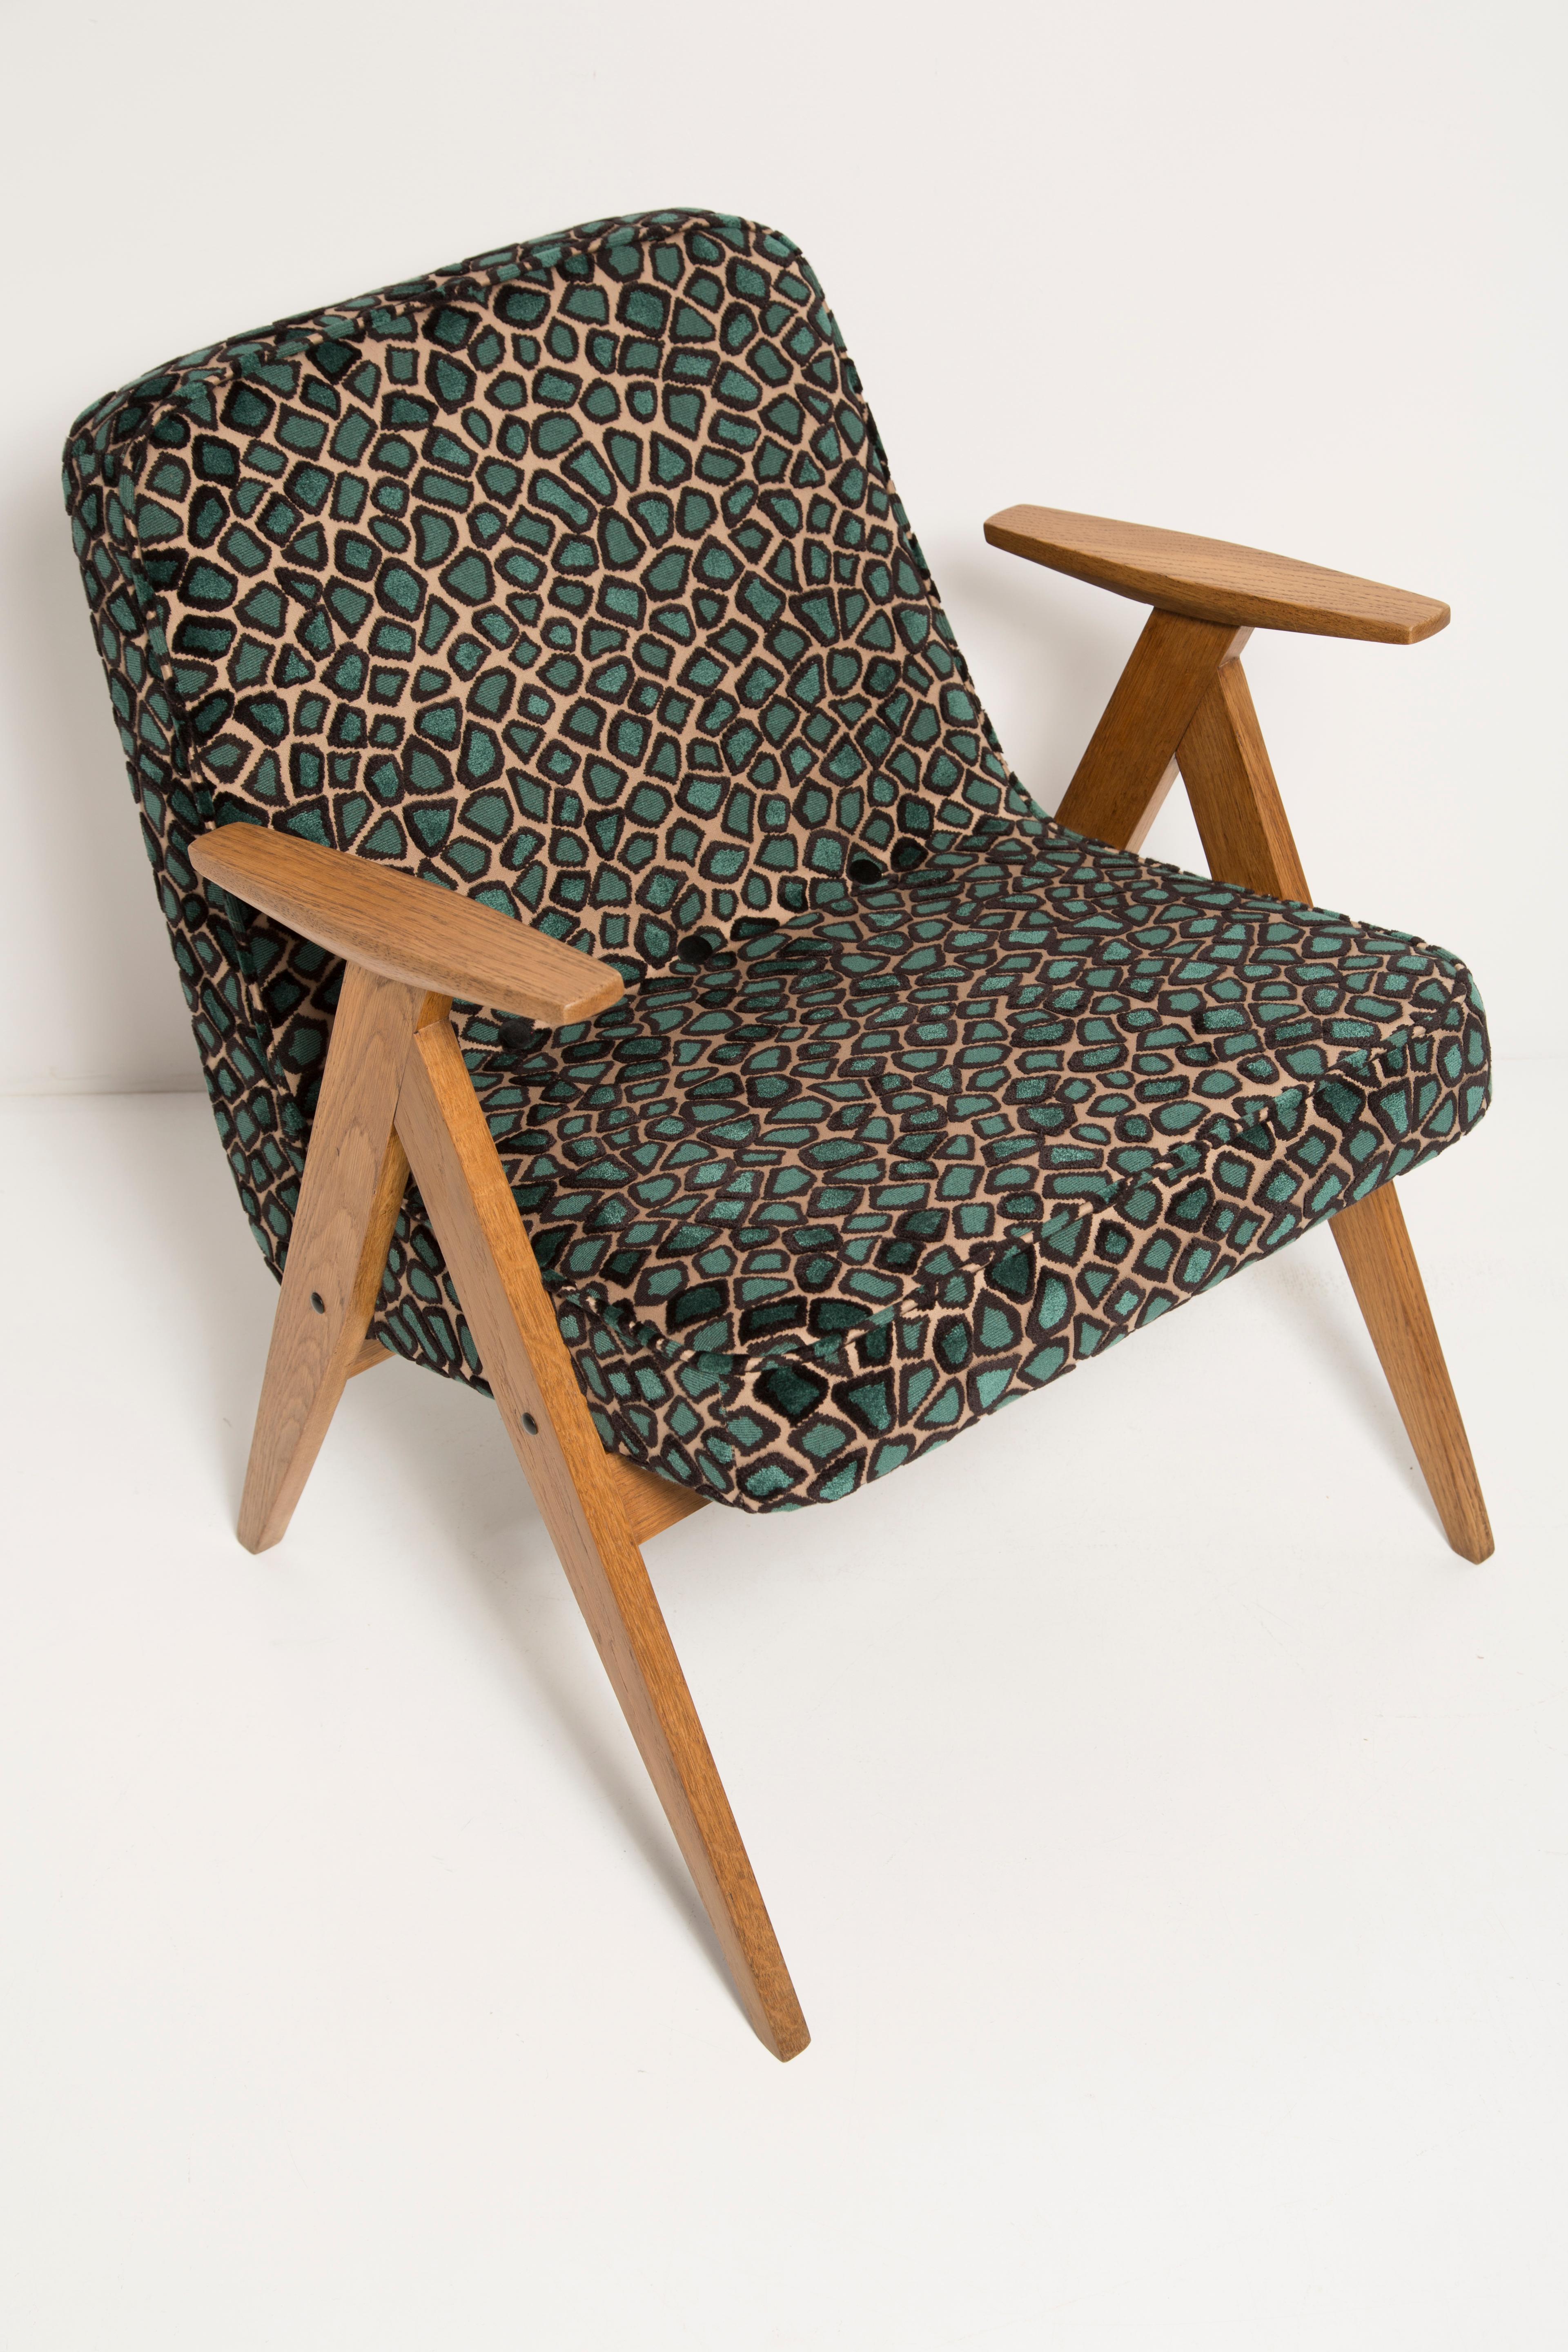 Hand-Crafted Two Mid Century 366 Armchairs in Leopard Velvet, by Chierowski, Europe, 1960s For Sale